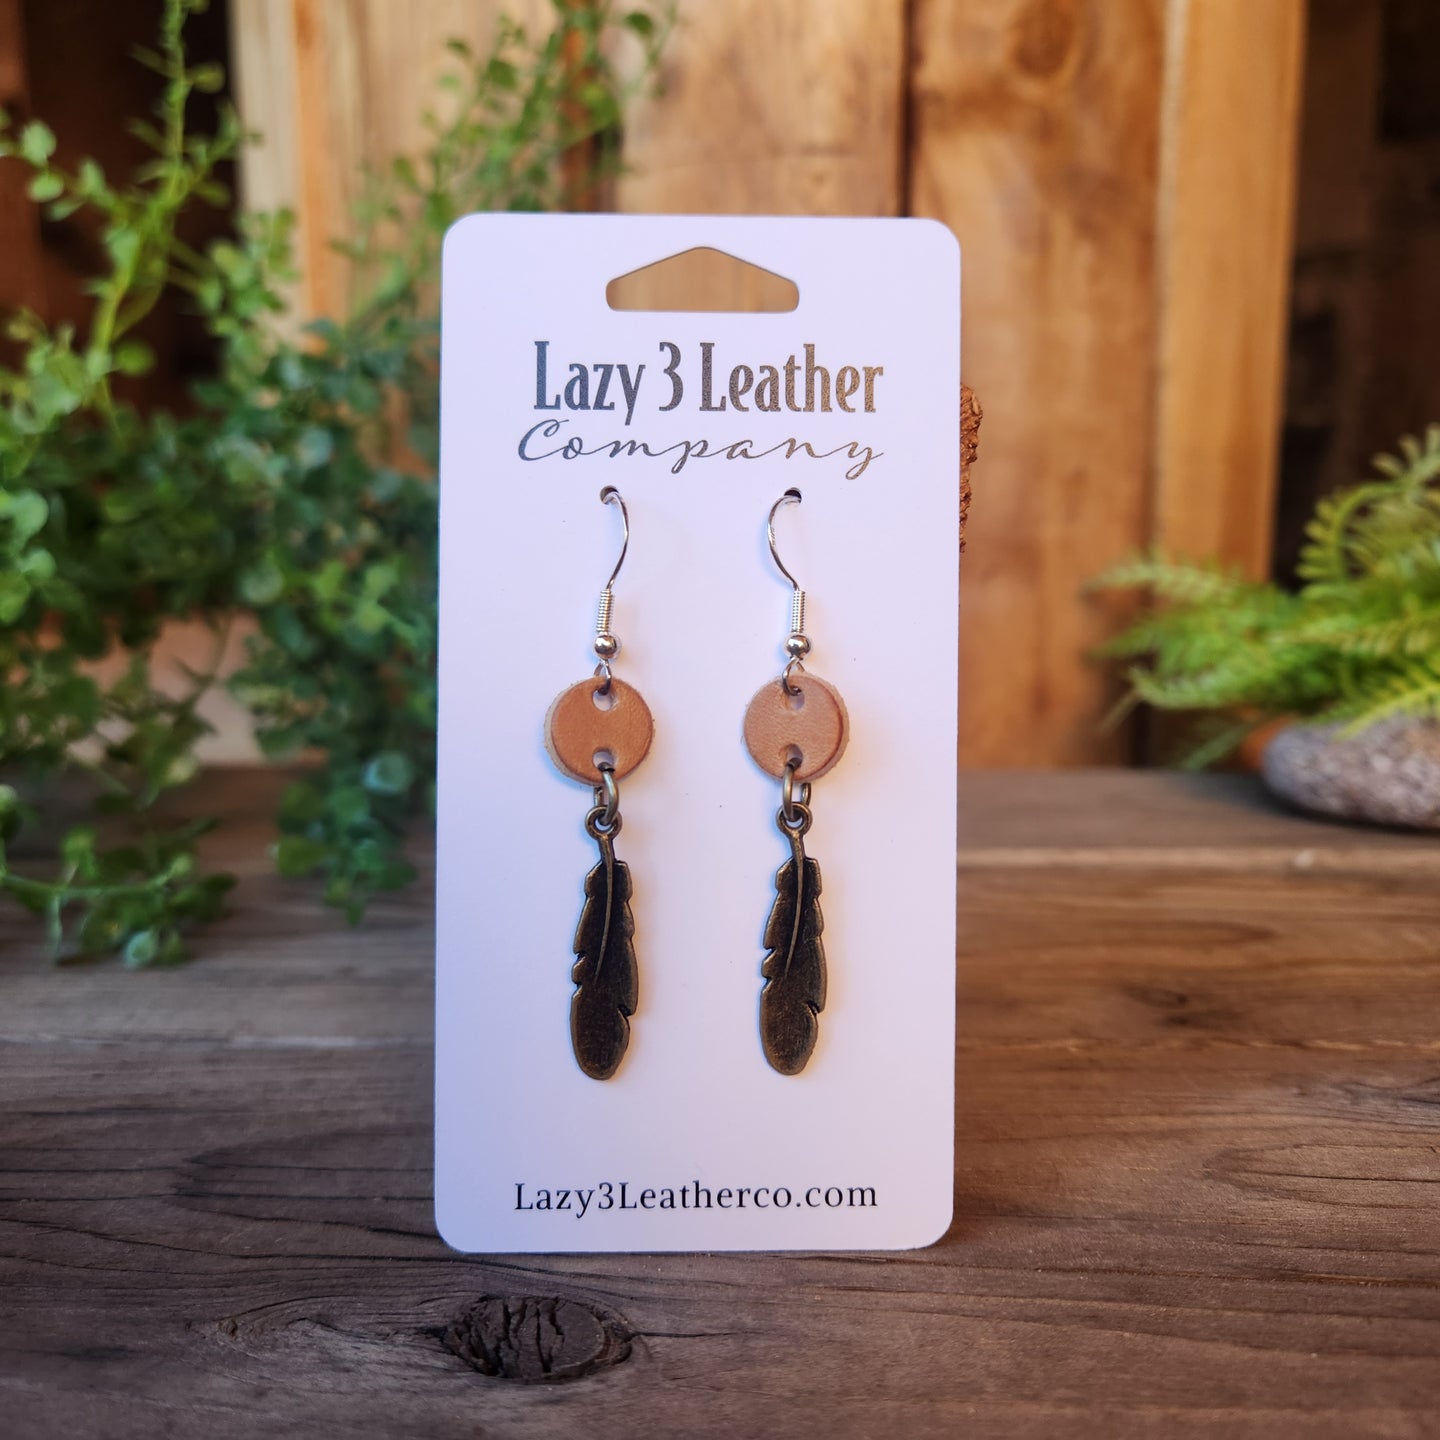 Leather & Feather Earrings - Lazy 3 Leather Company